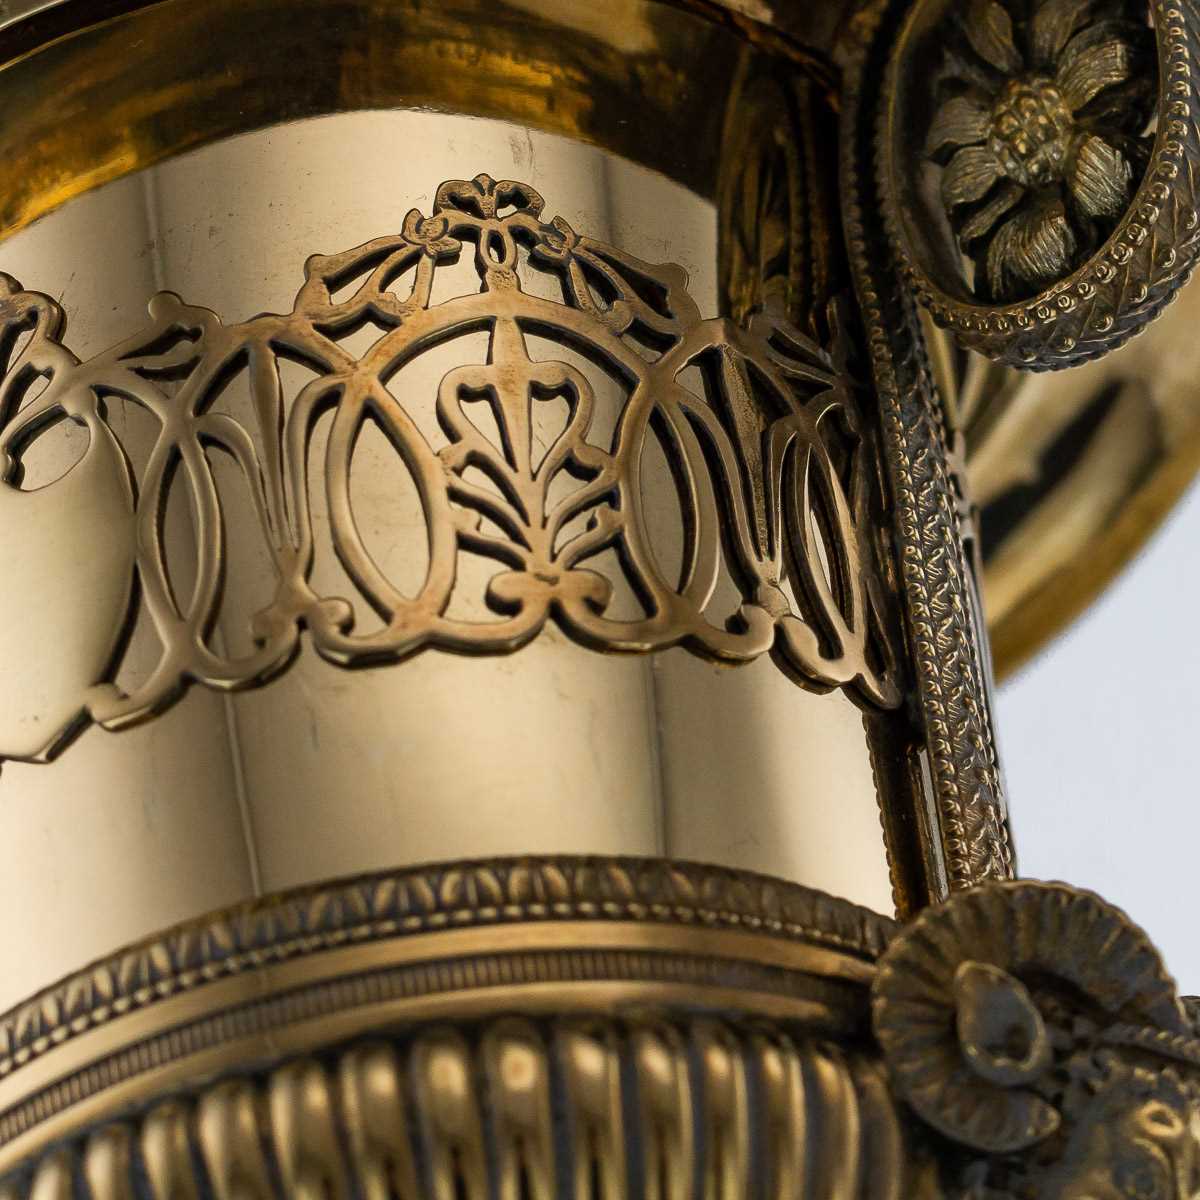 AN EARLY 19TH CENTURY SILVER GILT URN BY MARC JACQUART, PARIS - Image 12 of 19